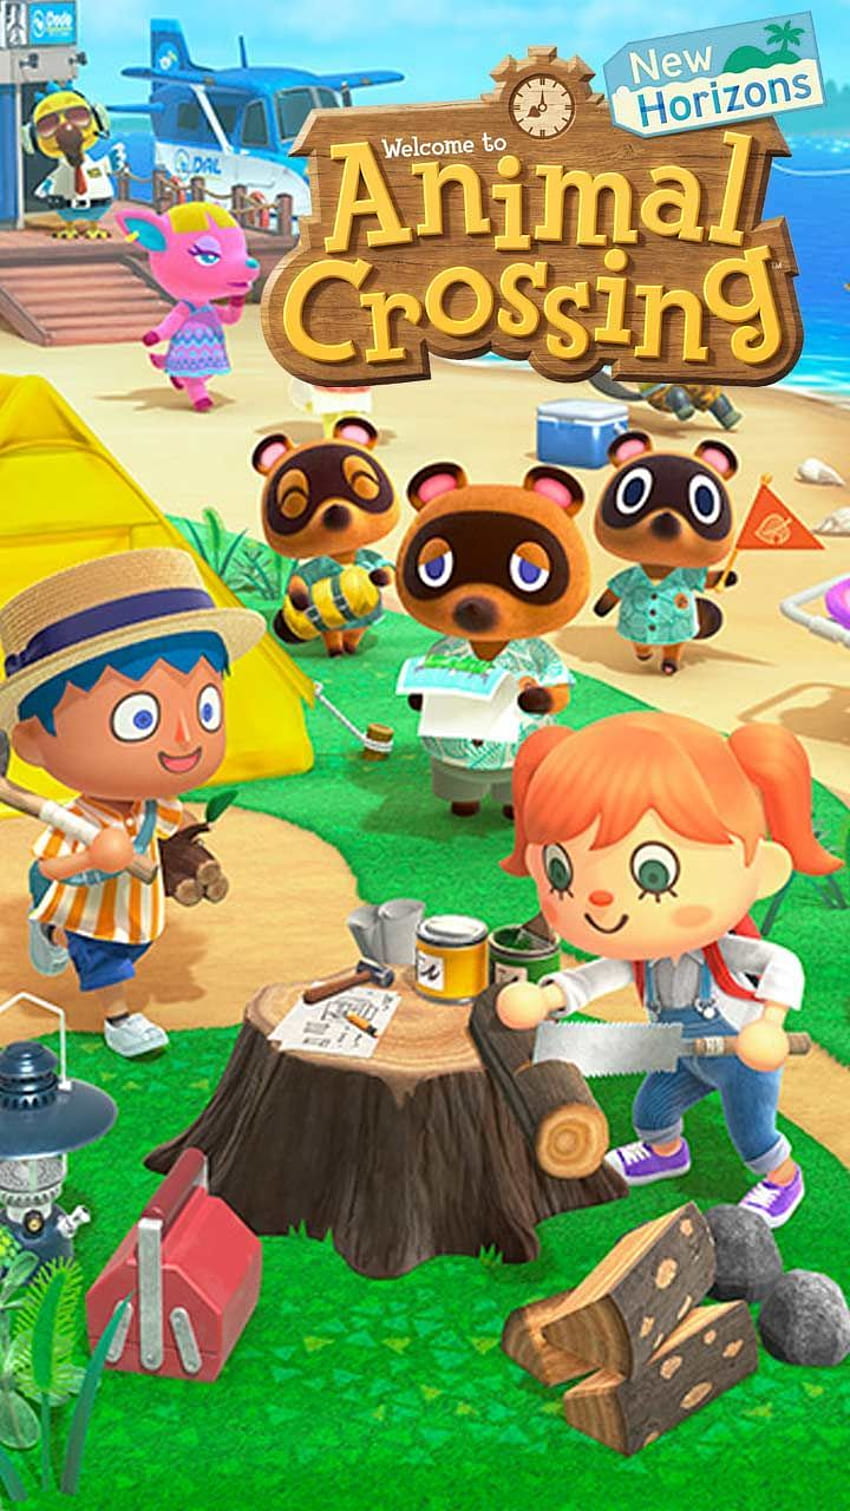 Animal crossing new horizons phone background art ideas for iPhone android lock screen in 2020. Animal crossing, Android art,, Animalcrossing HD phone wallpaper